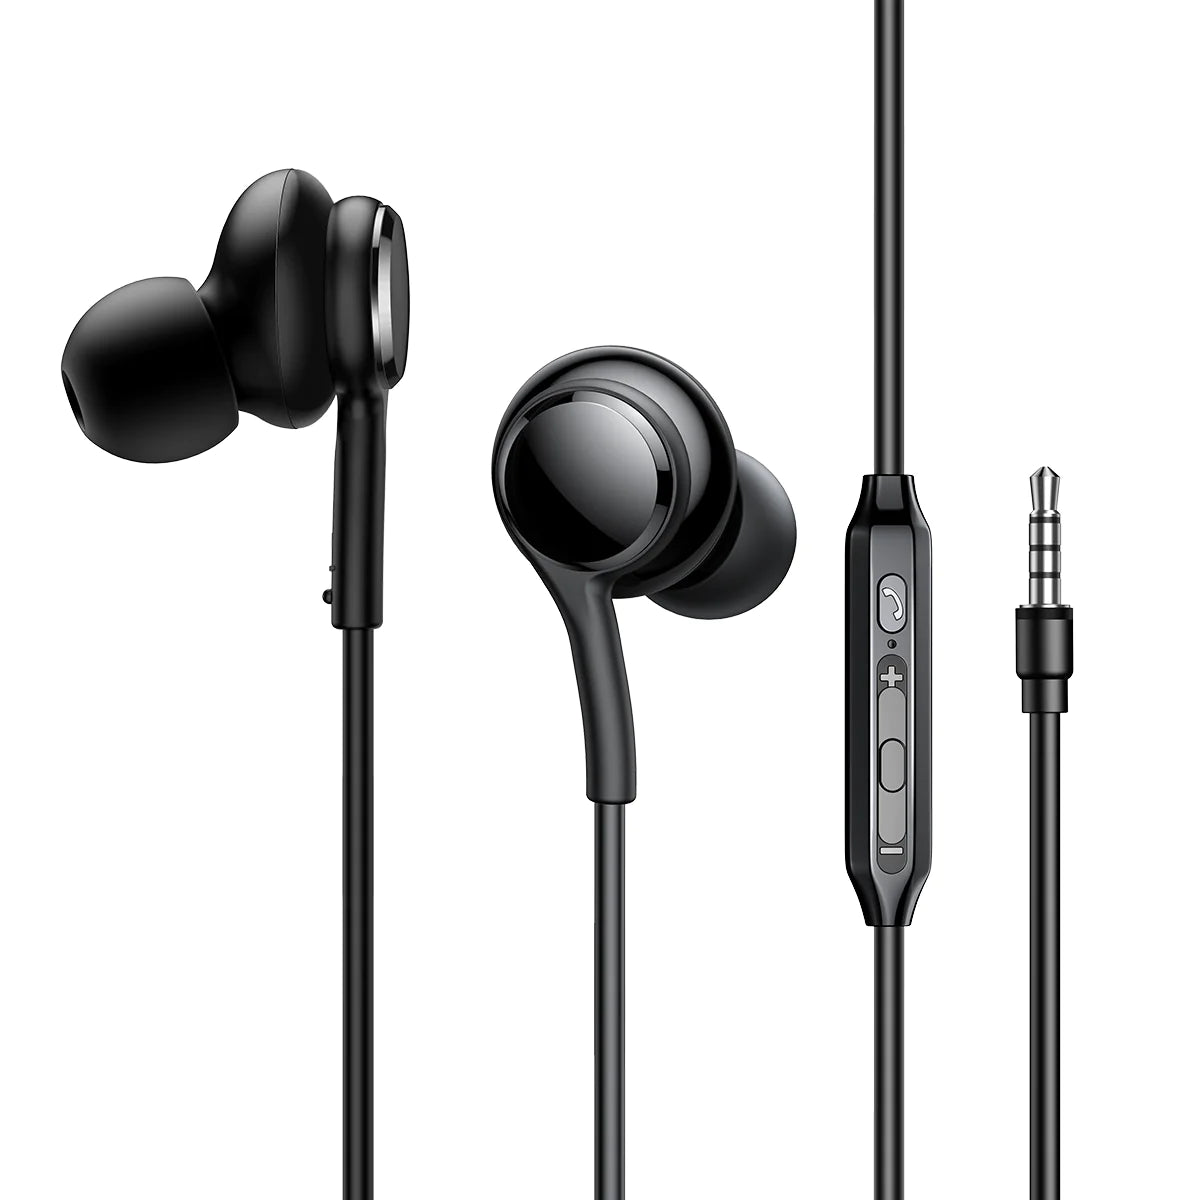 Joyroom Wired Series In-Ear Wired Earbuds